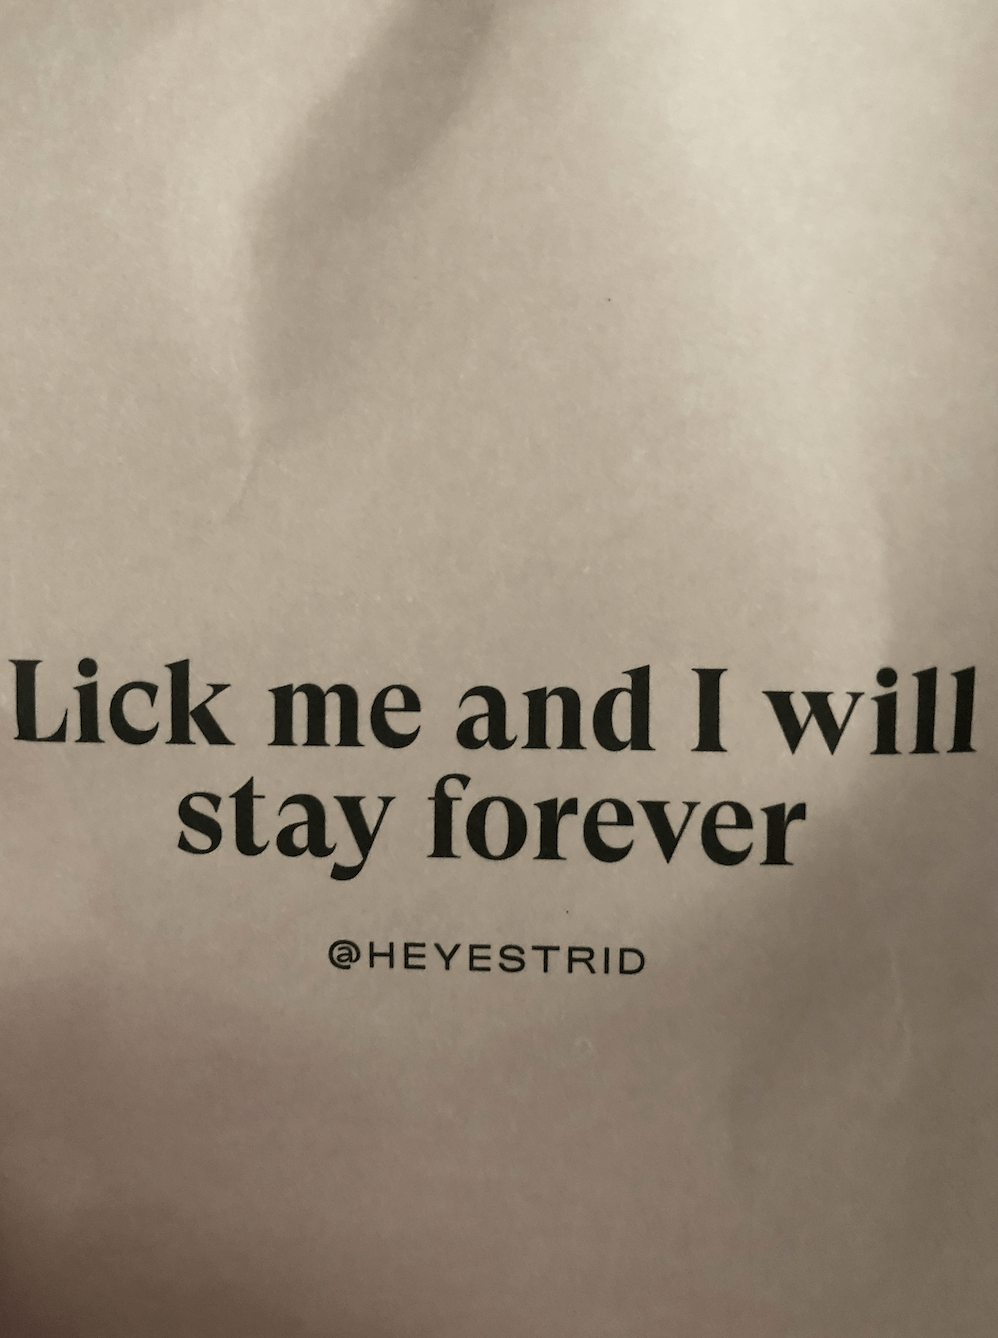 Lick me and I will stay forever quote on Estrid packaging